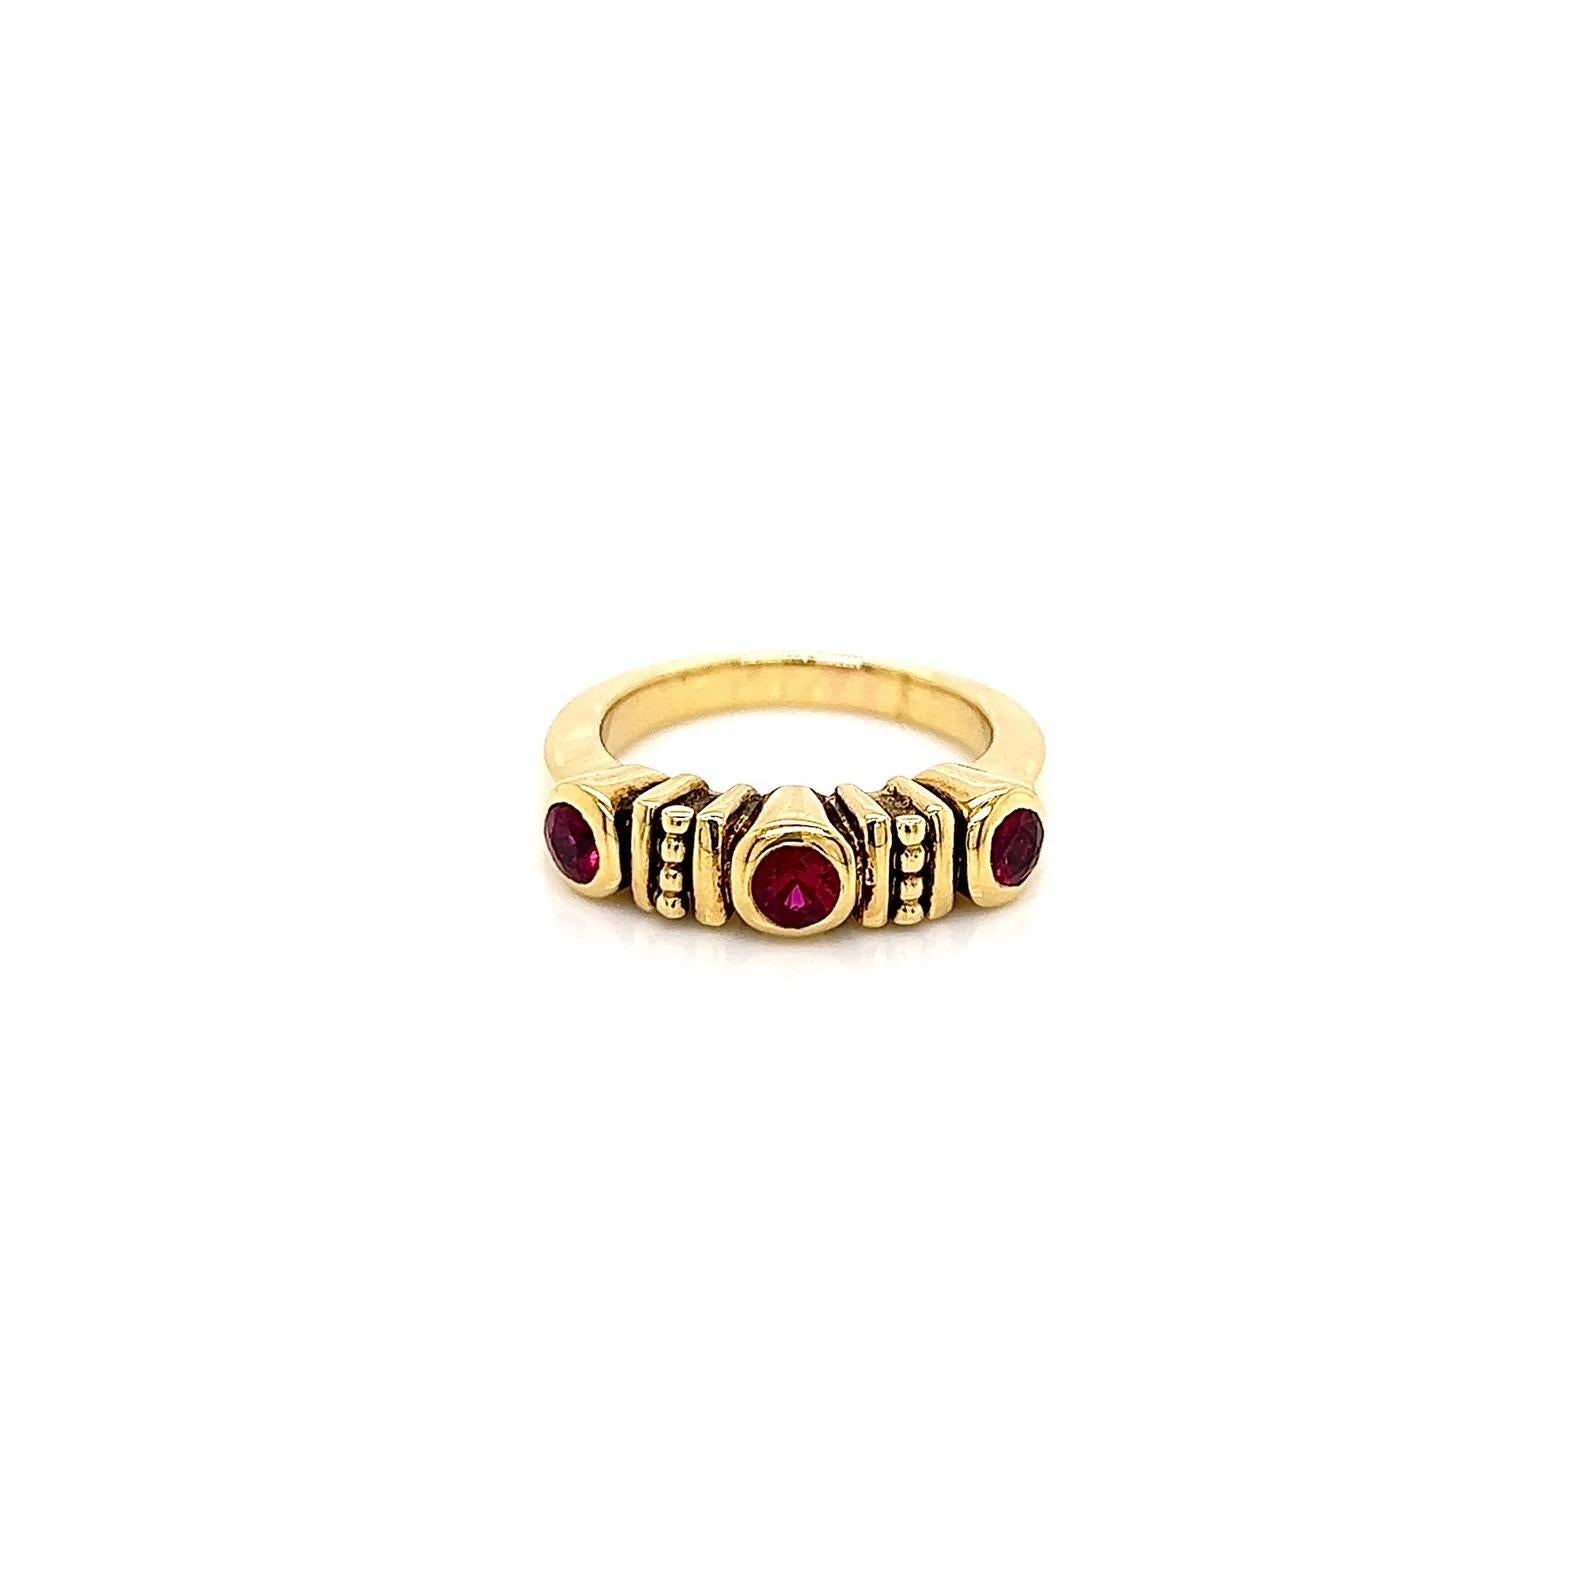 0.76Carat Ruby Ladies Ring

-Metal Type: 18K Yellow Gold
-0.76Carat Round Natural Ruby 
-Size 5.5
Resize is available. Just contact us before ordering, the price may vary from size to size

Made in New York City.